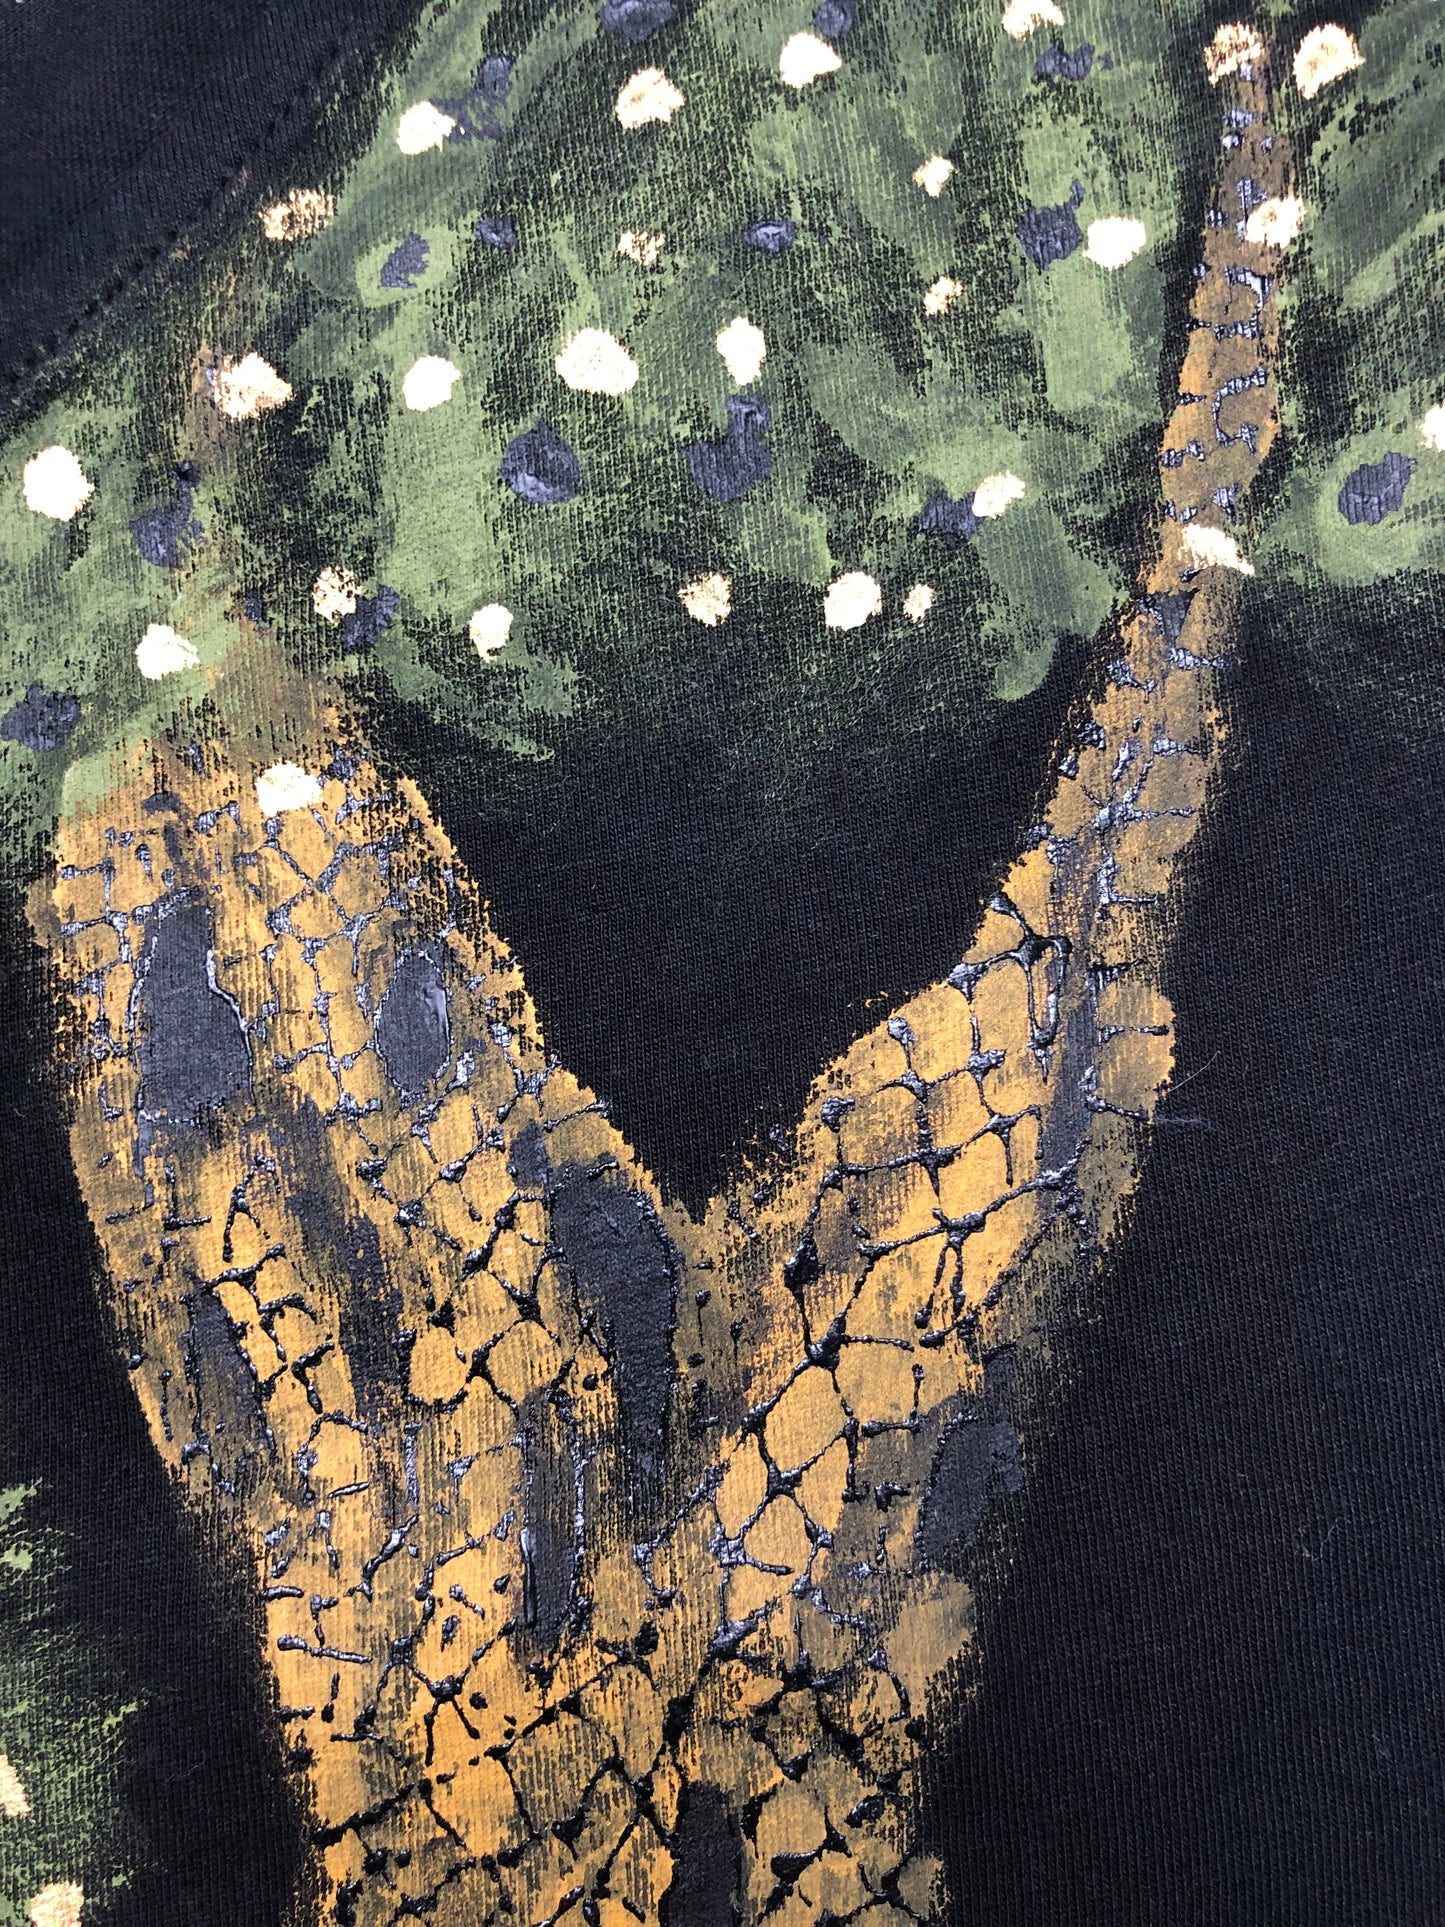 Detailed tree bark with green foliage in an exquisite pattern on a women's t-shirt